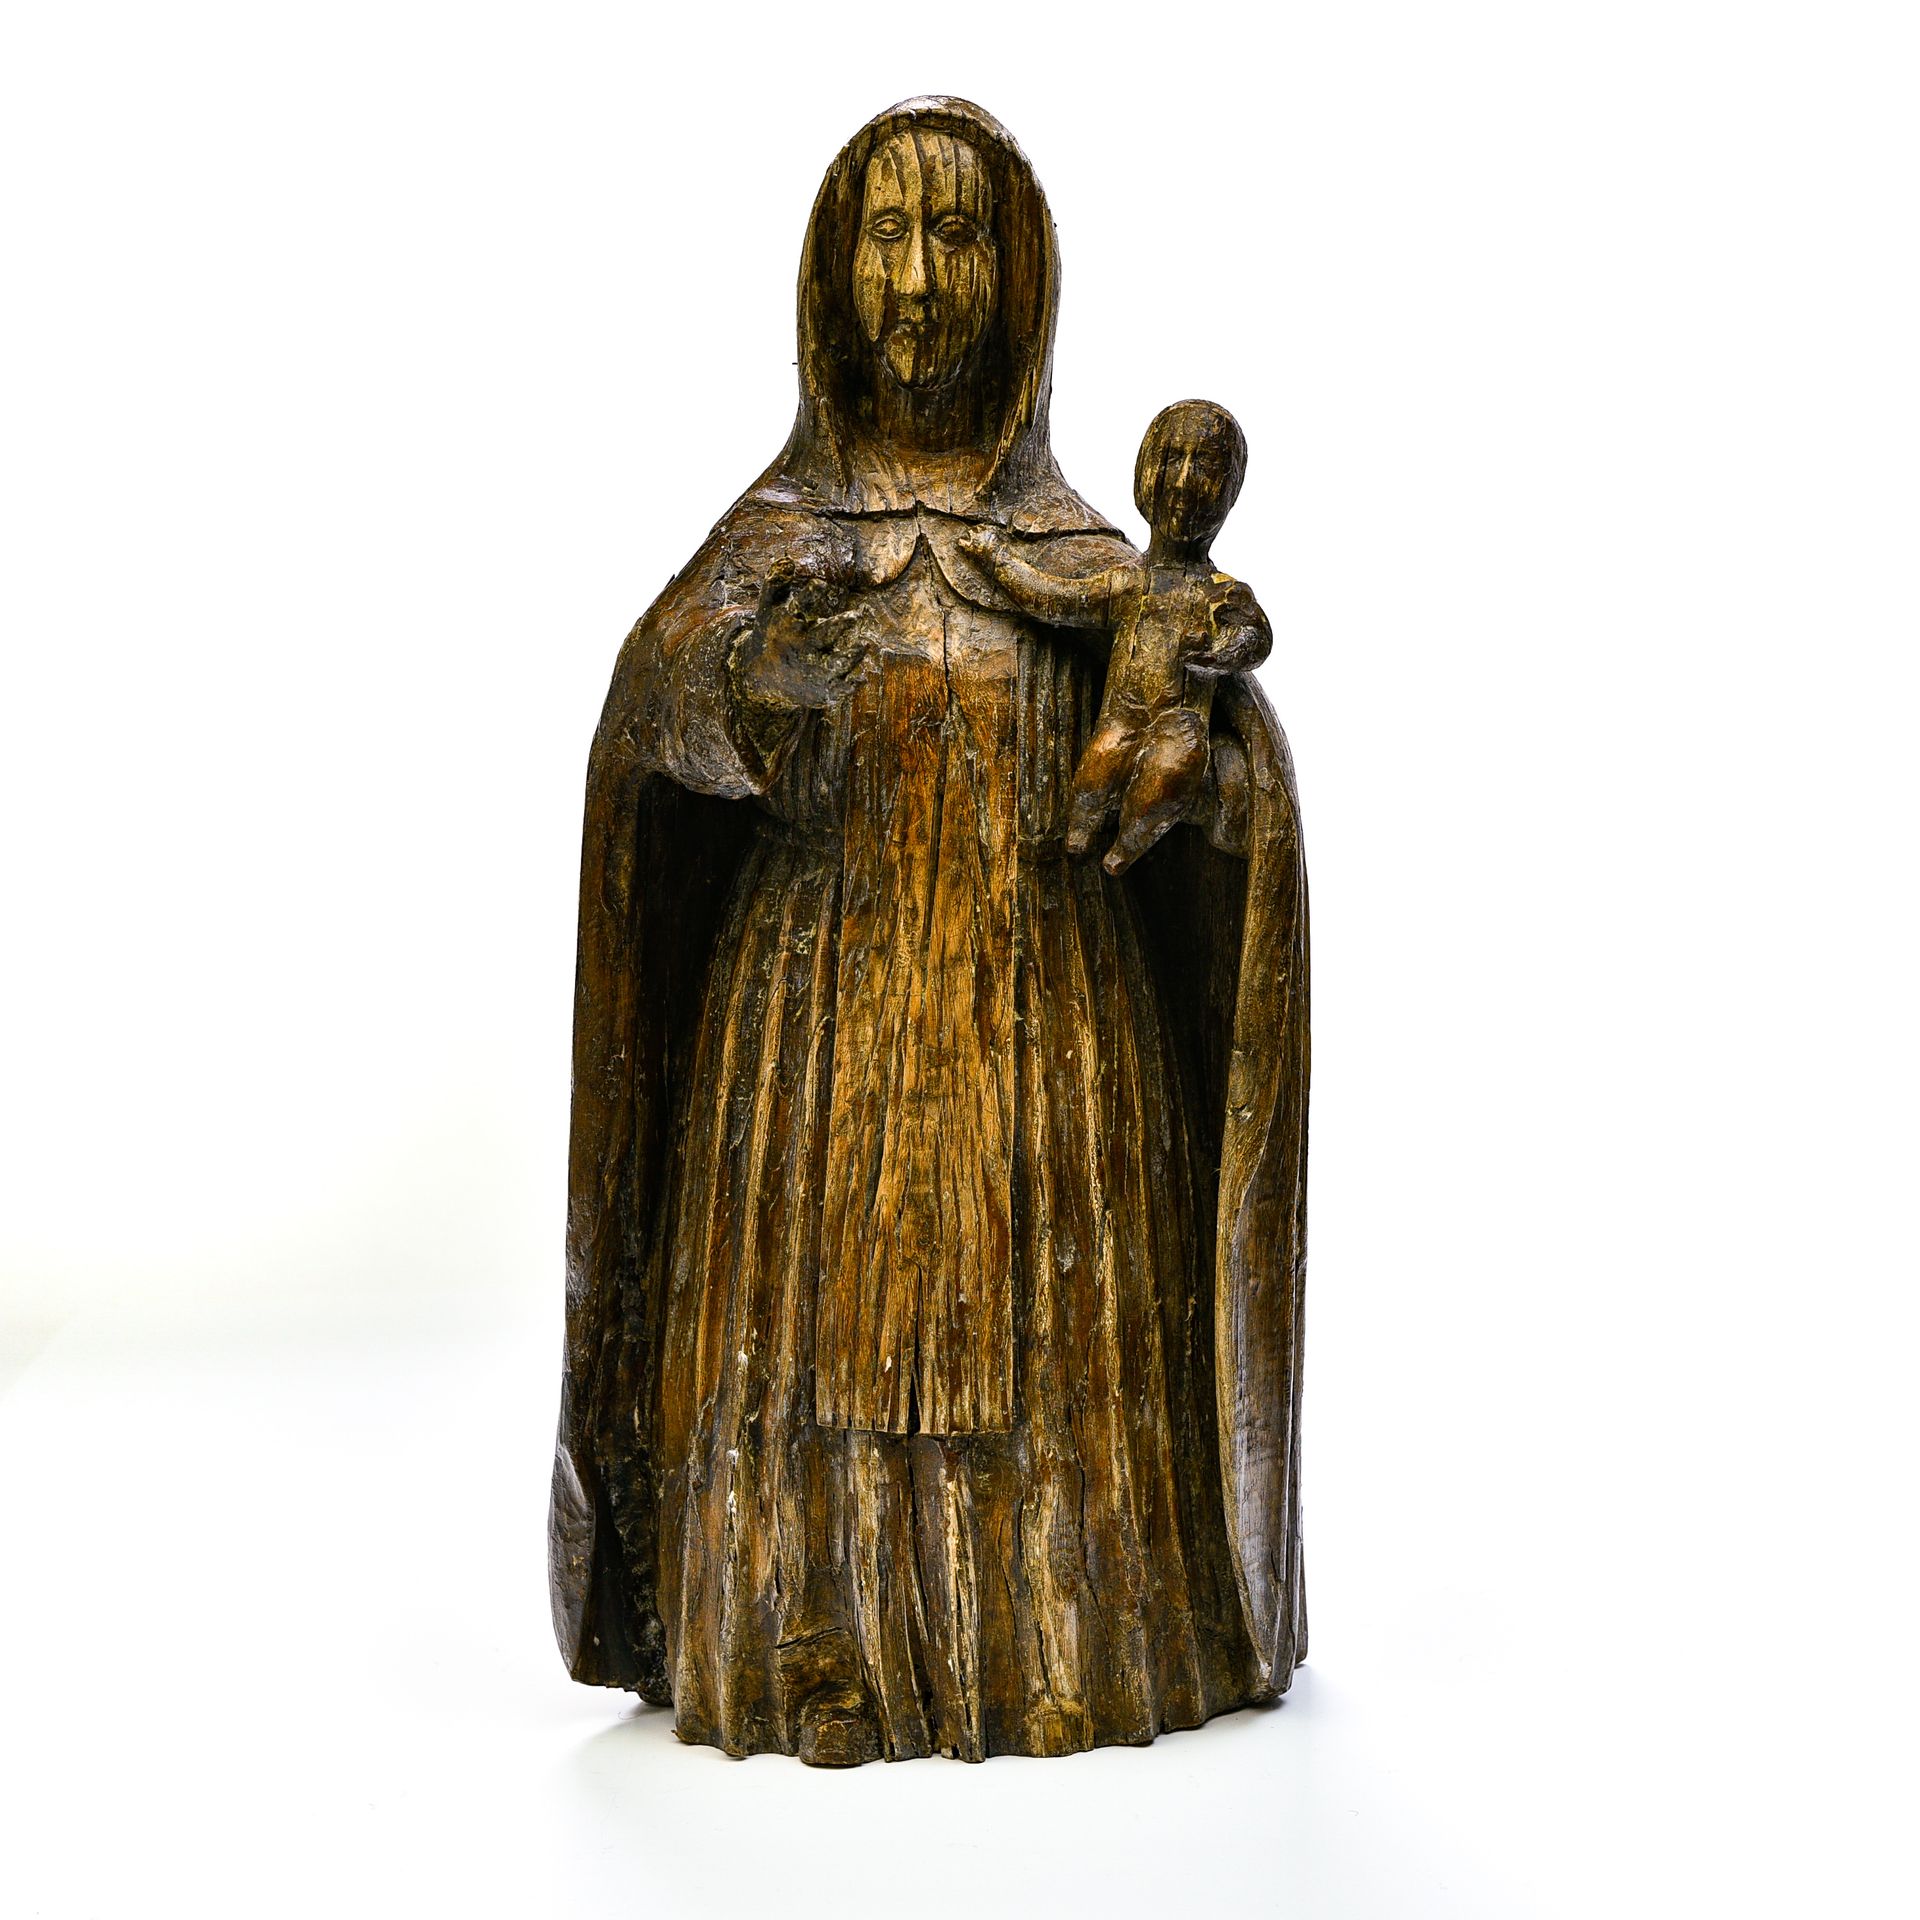 Null Madonna and Child

15TH CENTURY

Ronde-bosse carved wood. Mary standing hol&hellip;